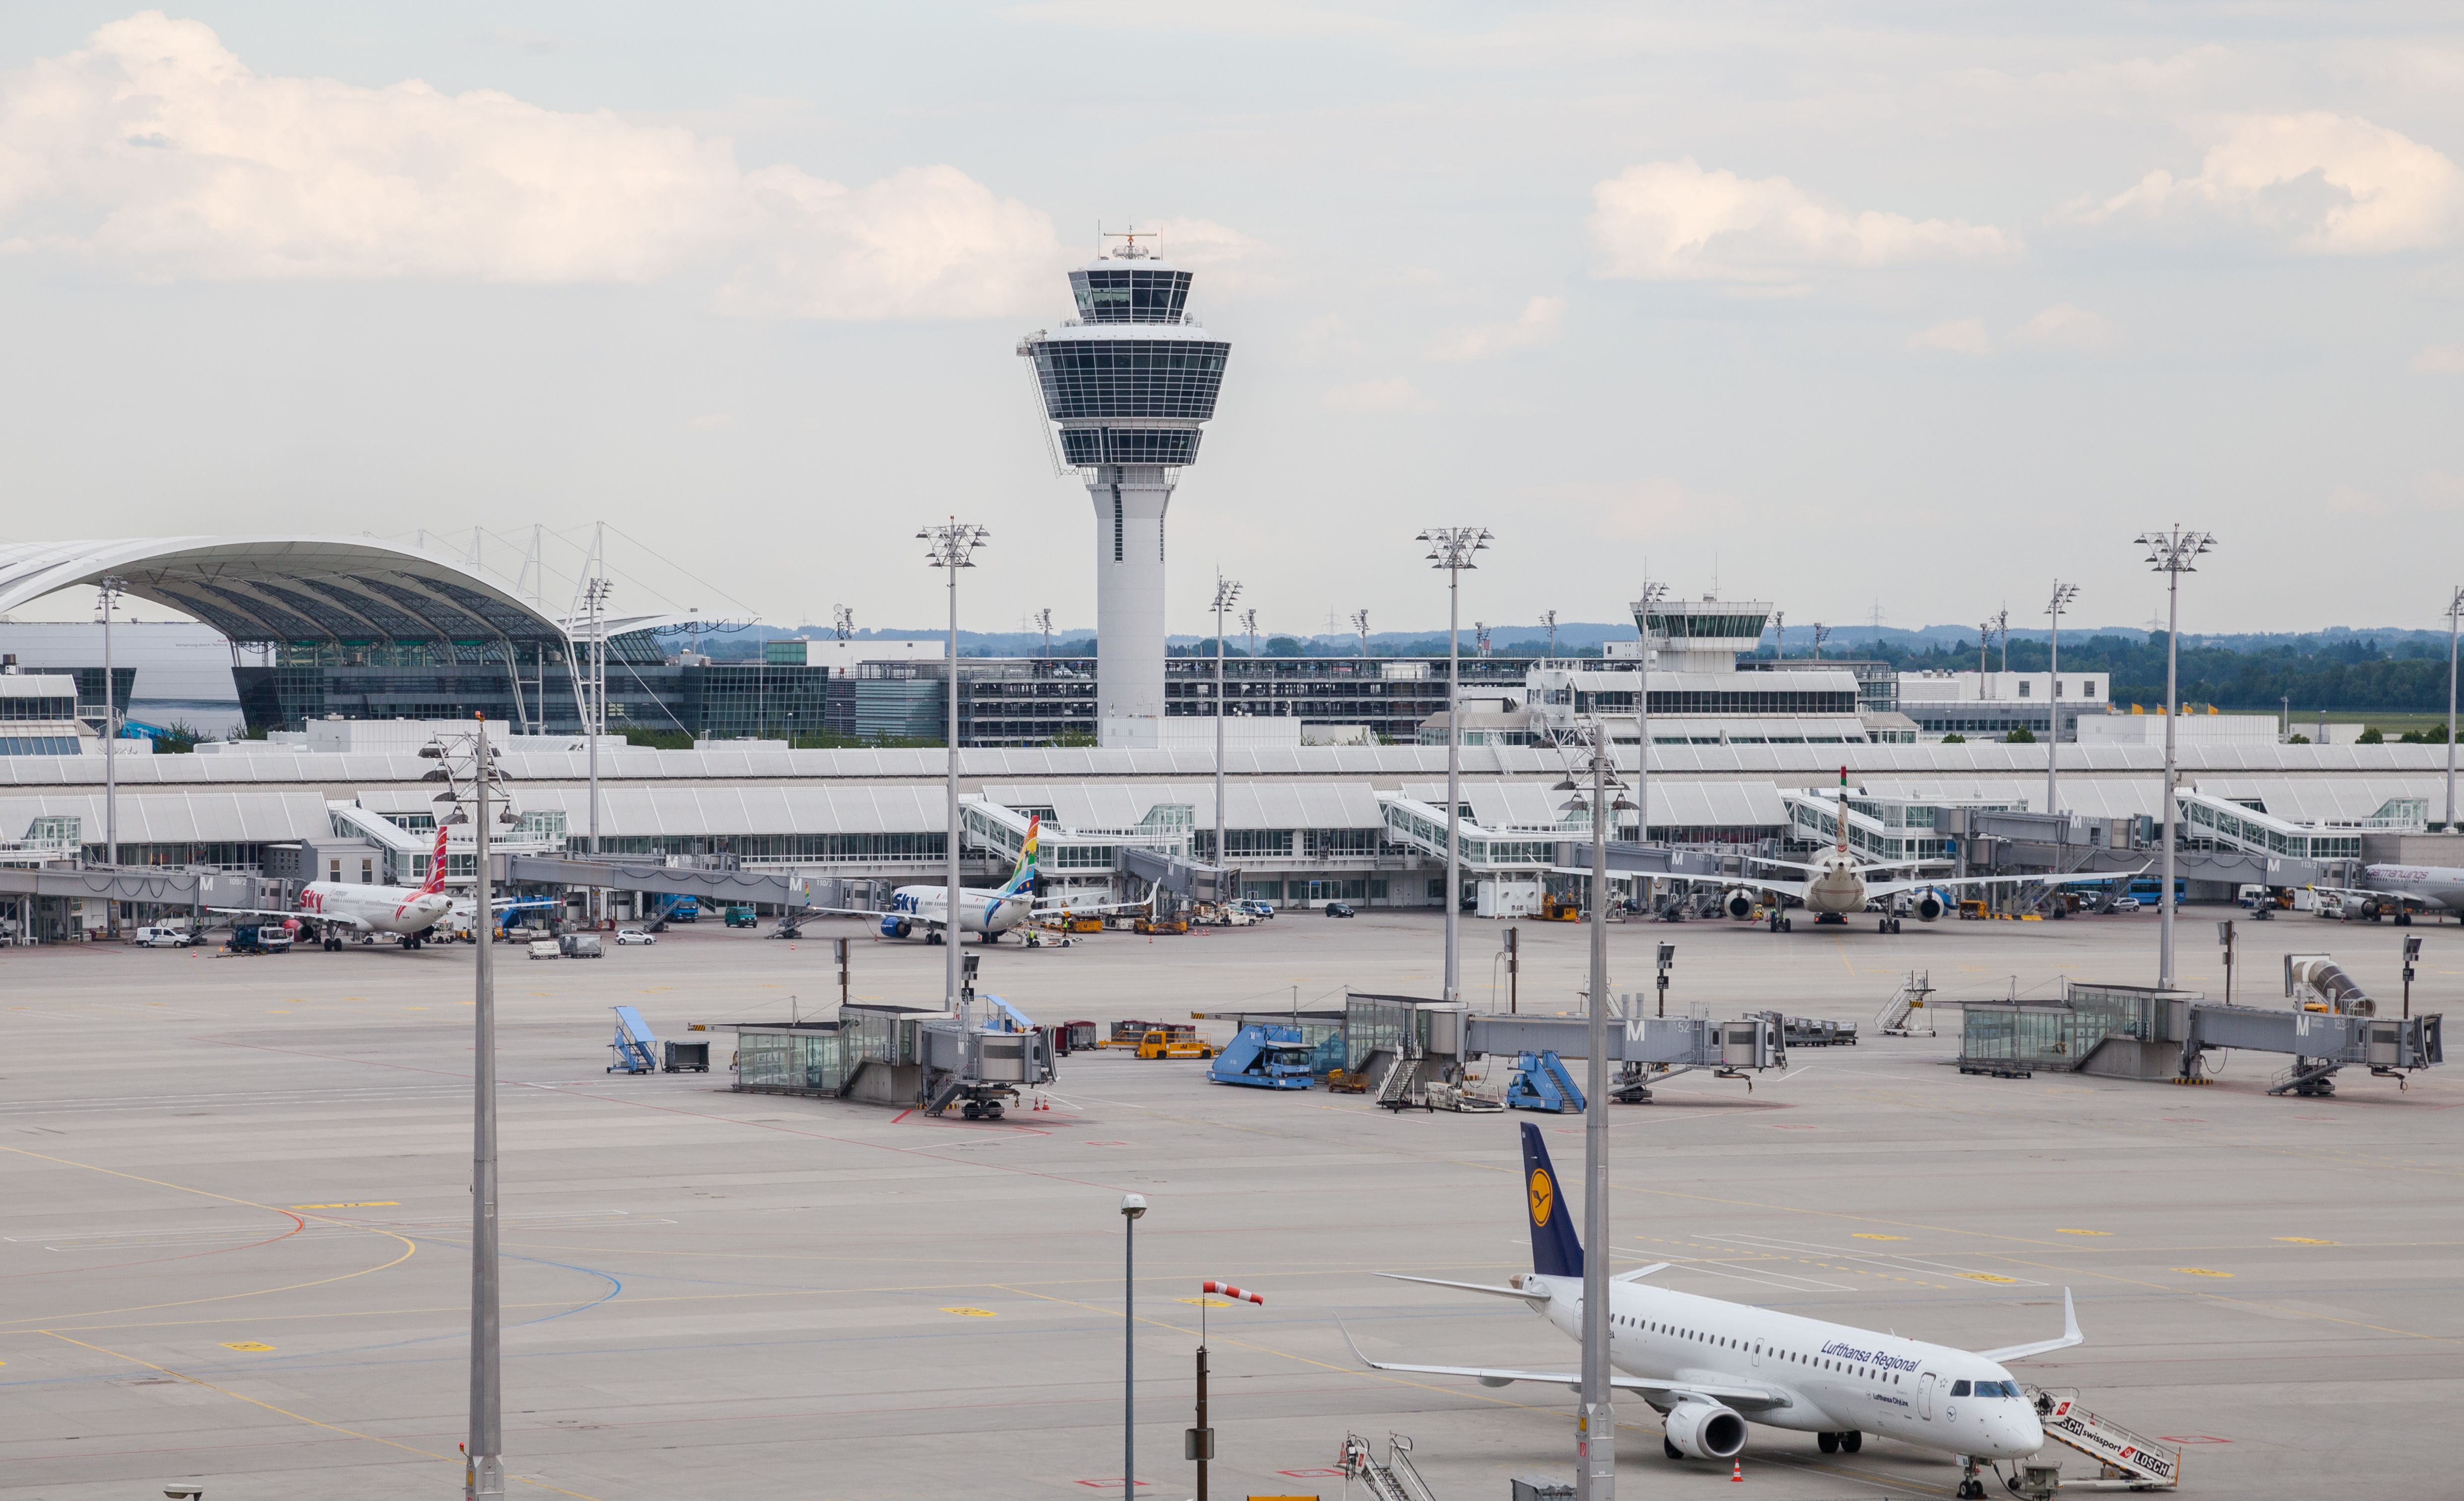 Photo of the Munich Airport, with many parked aircraft.